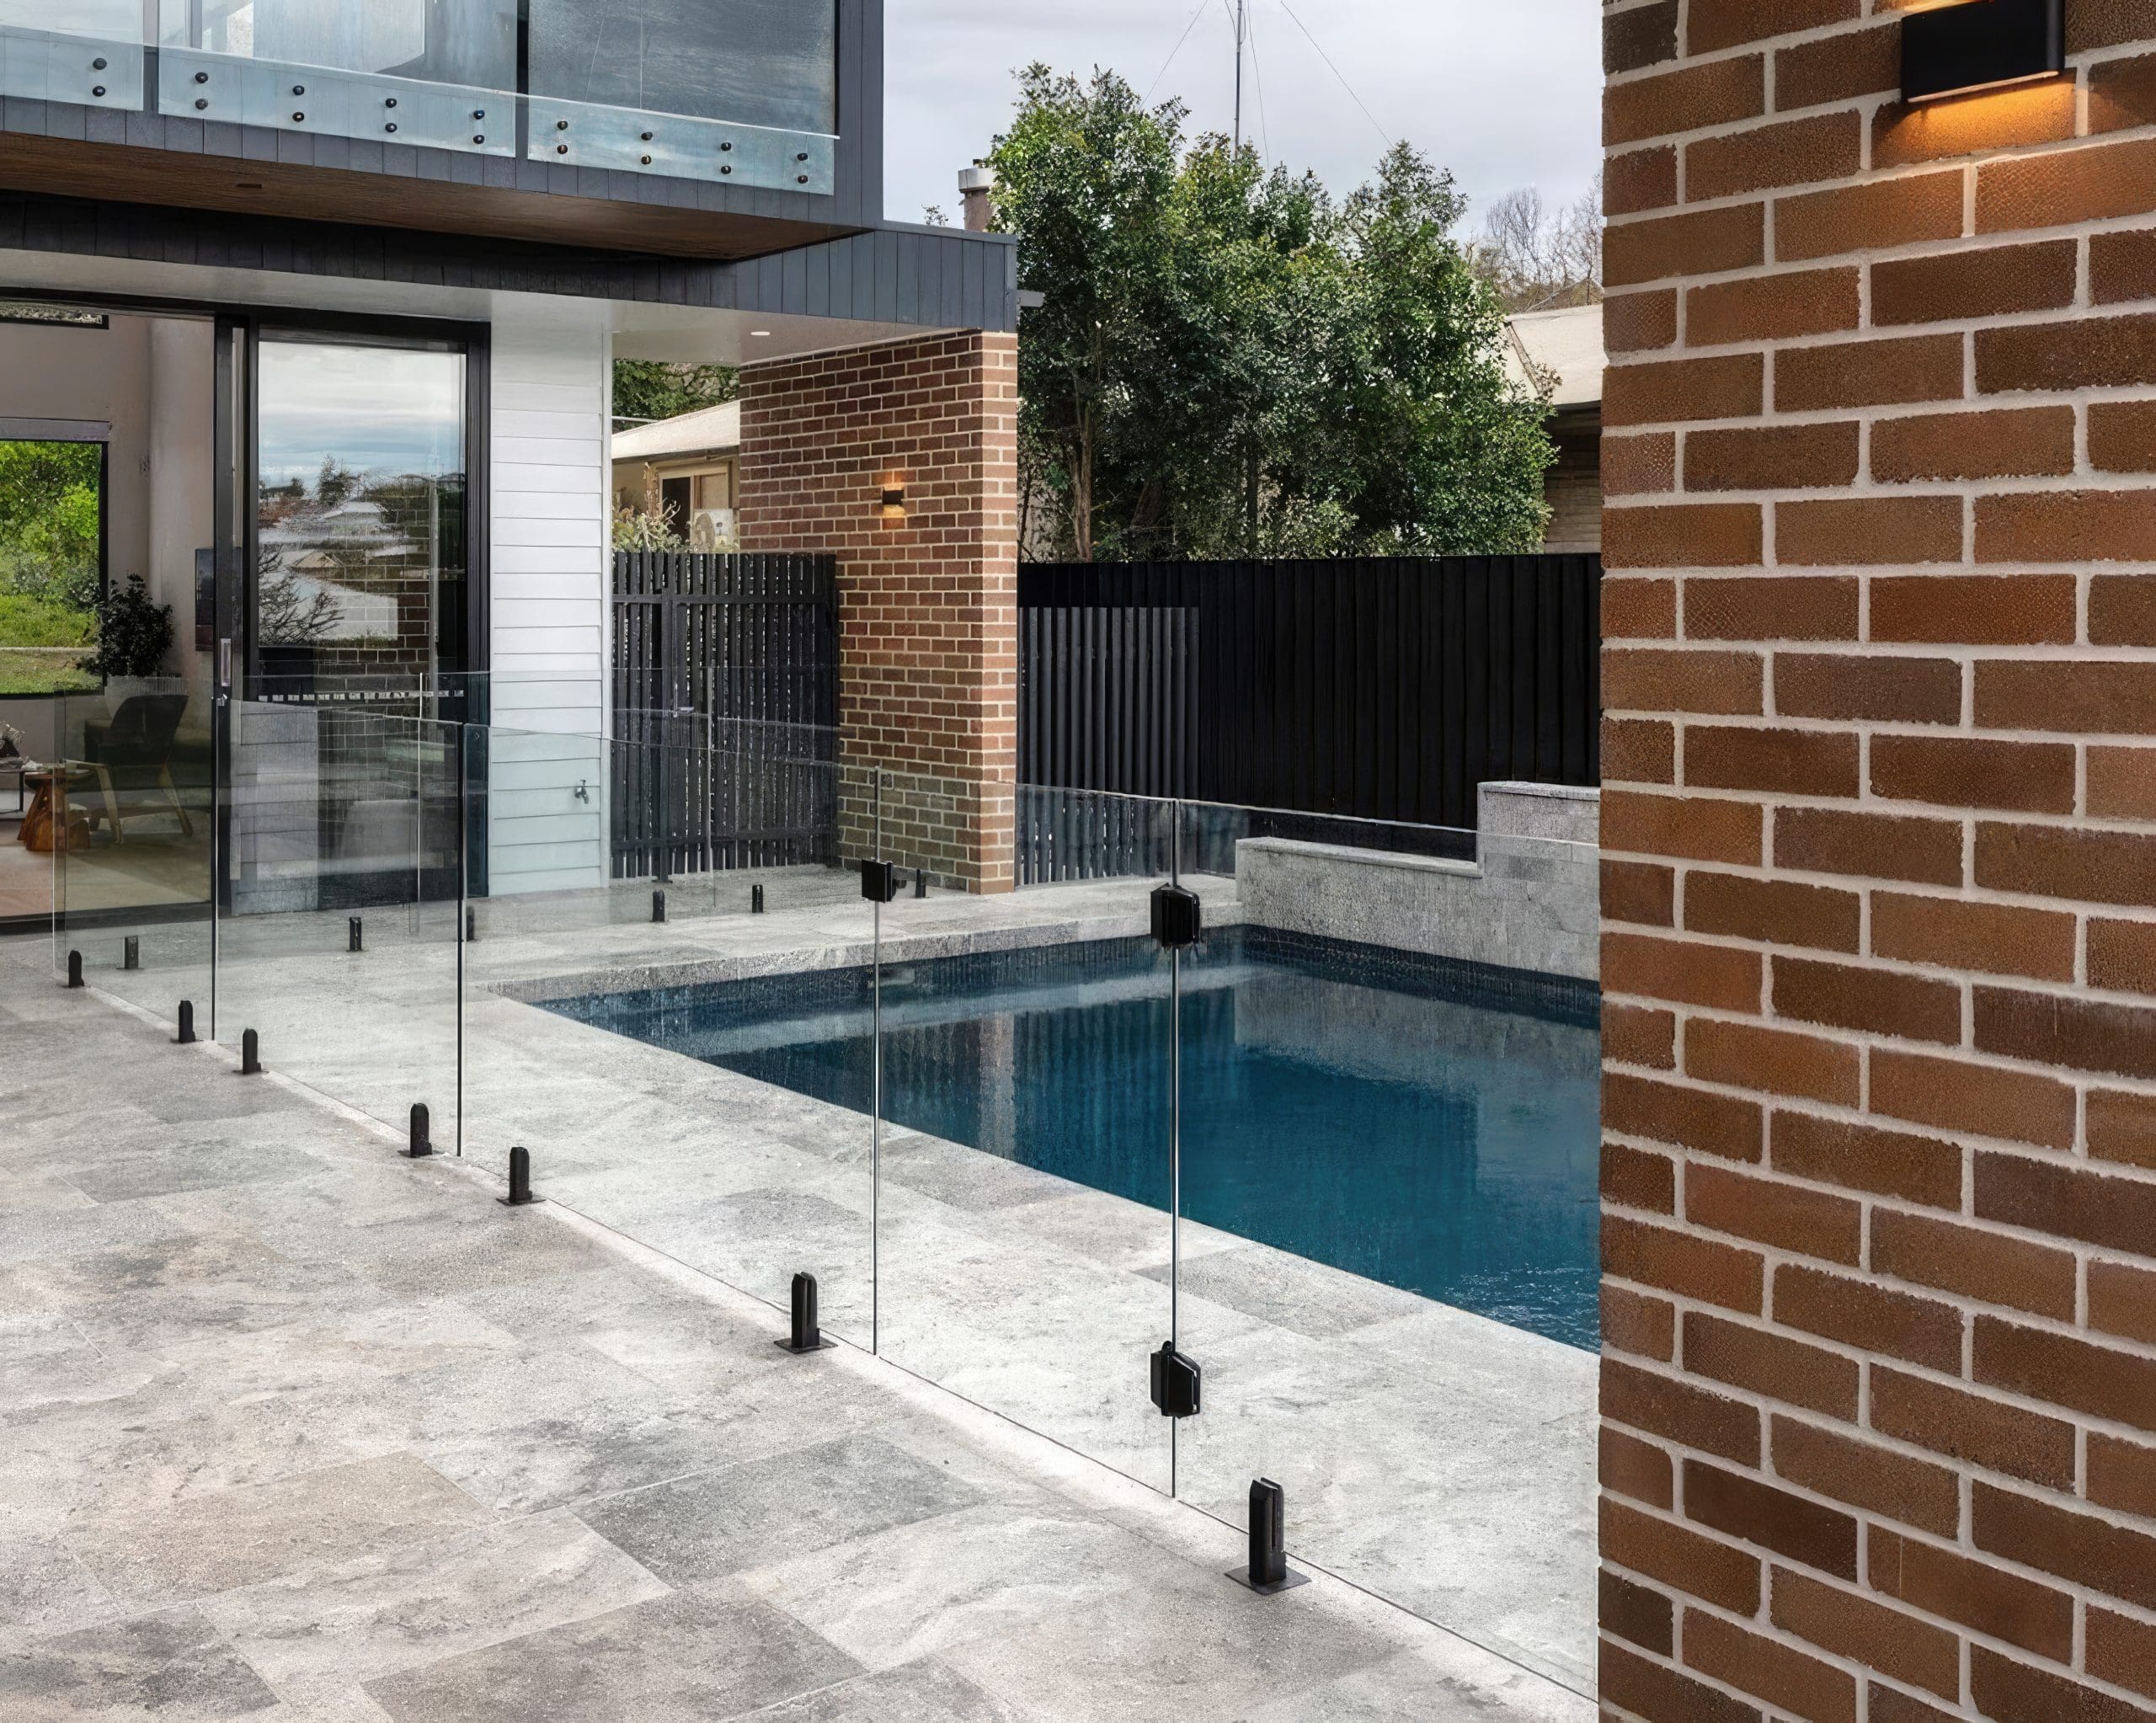 PREMIUM SILVER TRAVERTINE_RMS TRADERS_NATURAL STONE SUPPLIER POOL TILES AND PAVING MELBOURNE (82)xx-gigapixel-standard-scale-4_00x